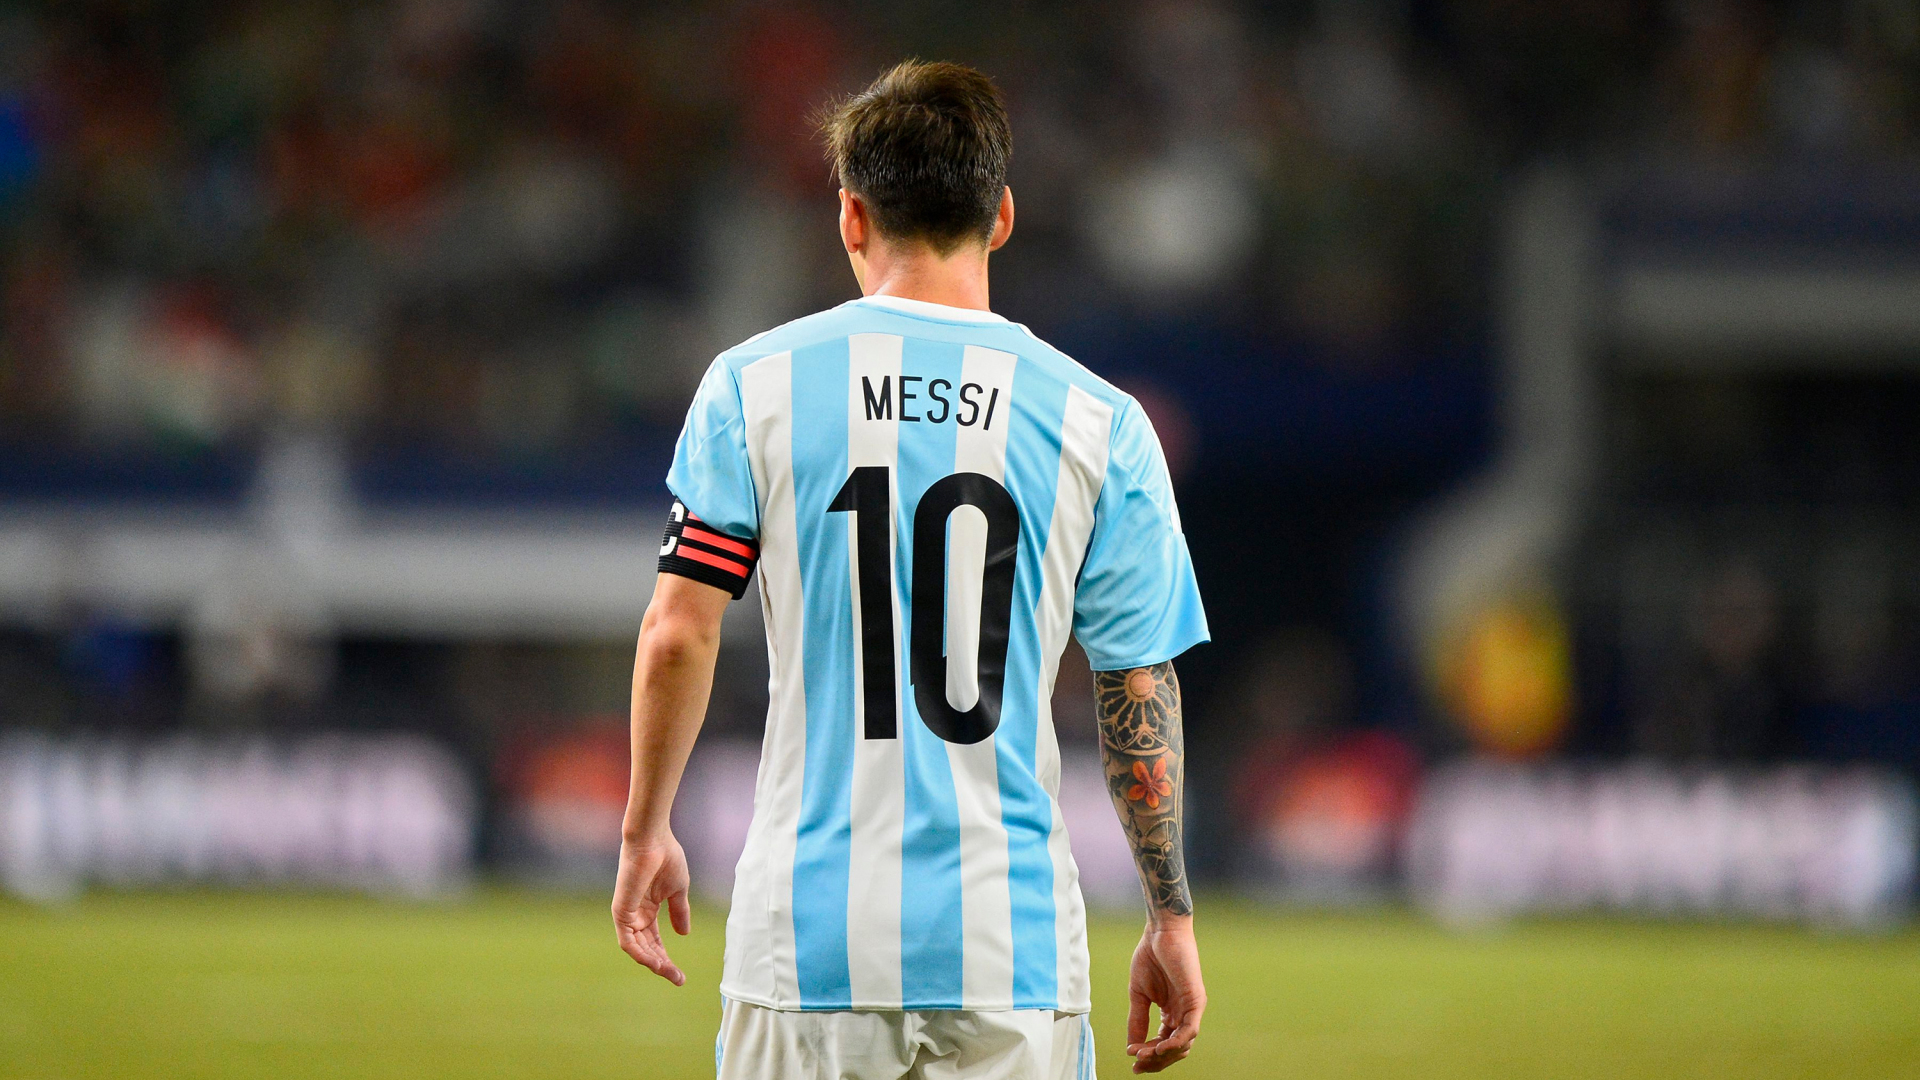 Download wallpaper 1920x1080 lionel messi, 10 number, jersey, full hd,  hdtv, fhd, 1080p wallpaper, 1920x1080 hd background, 9606